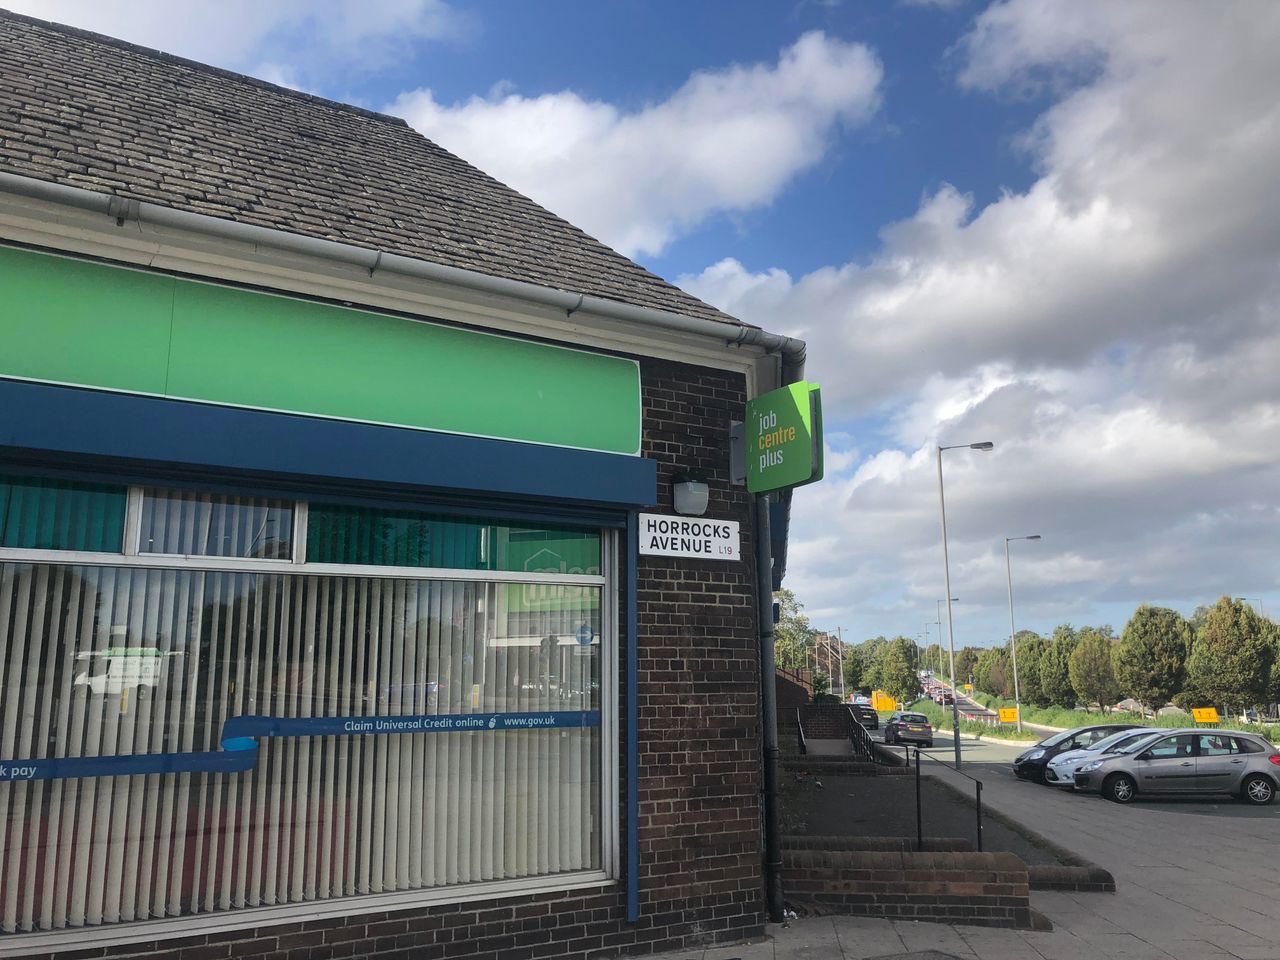 The Garston job centre, which will begin rolling out Universal Credit next week.